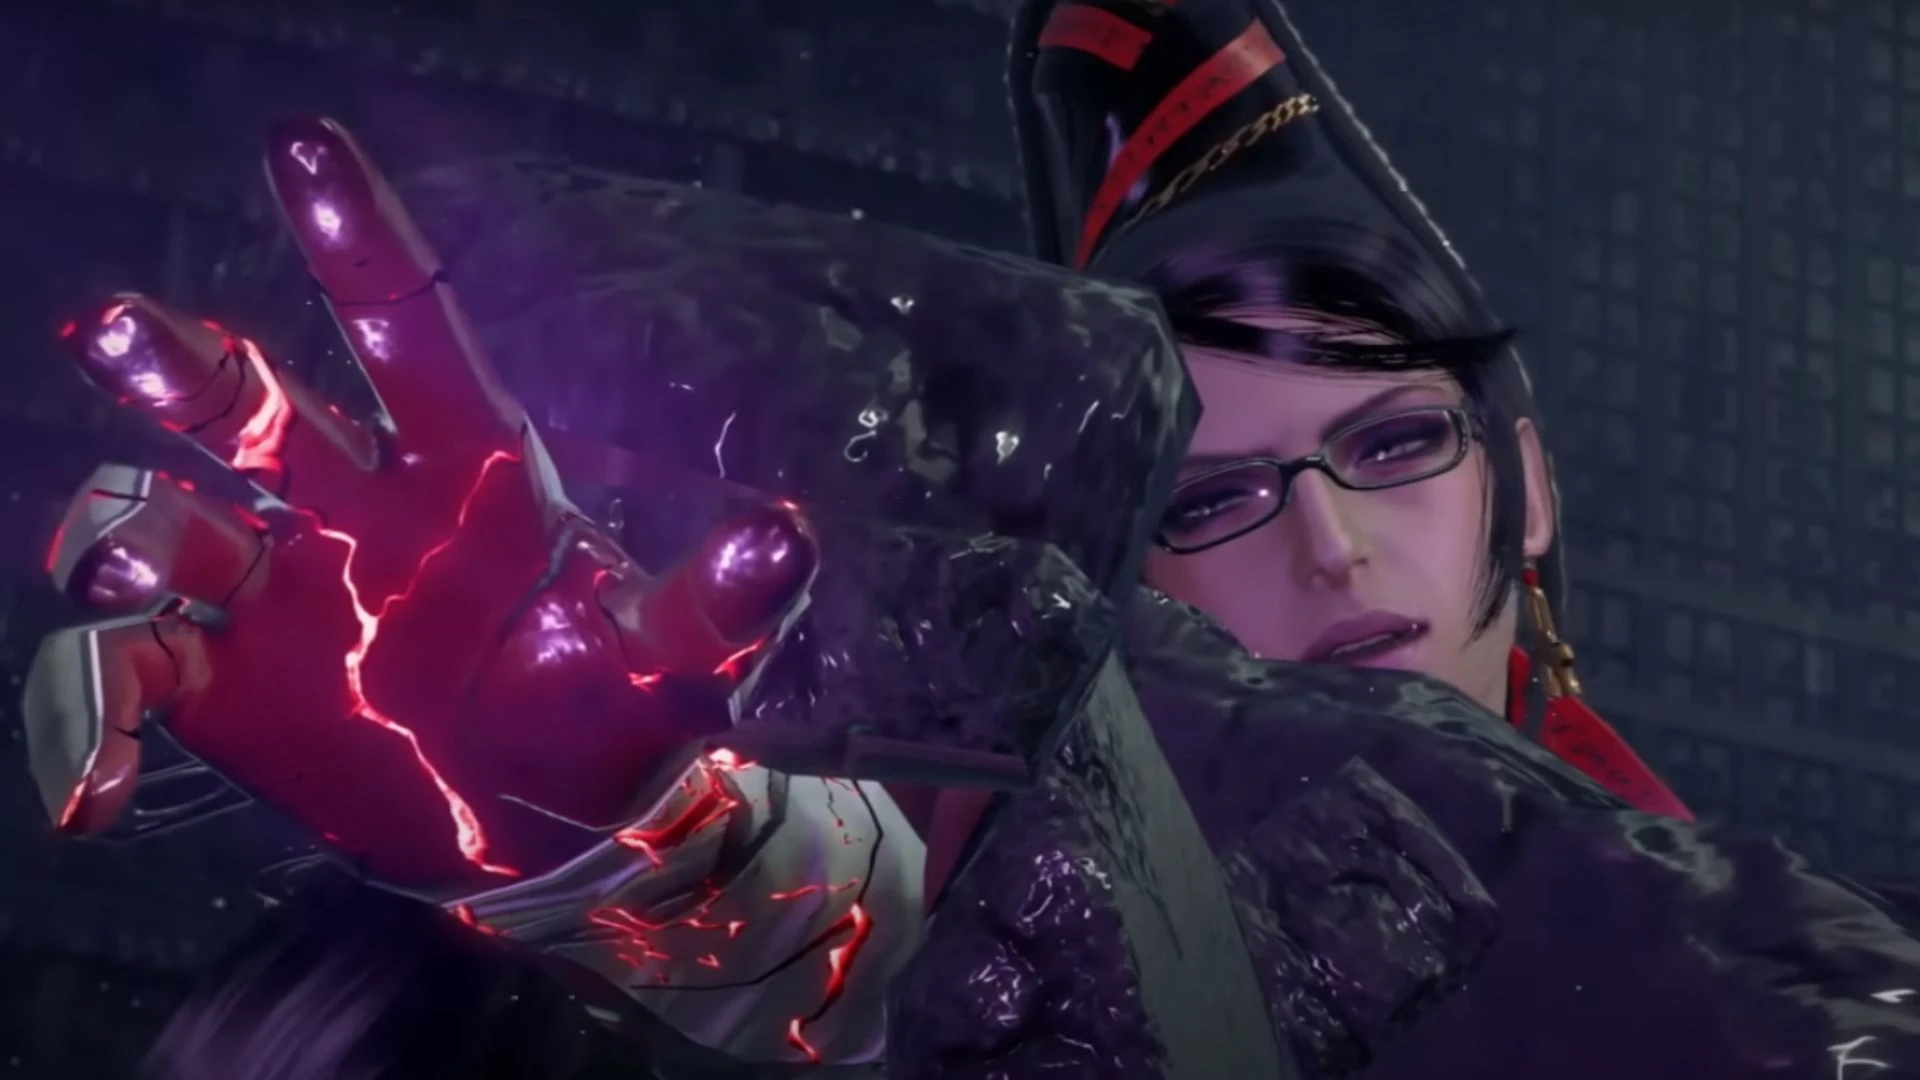 Bayonetta 3 Parents Guide and Age Rating (2022)